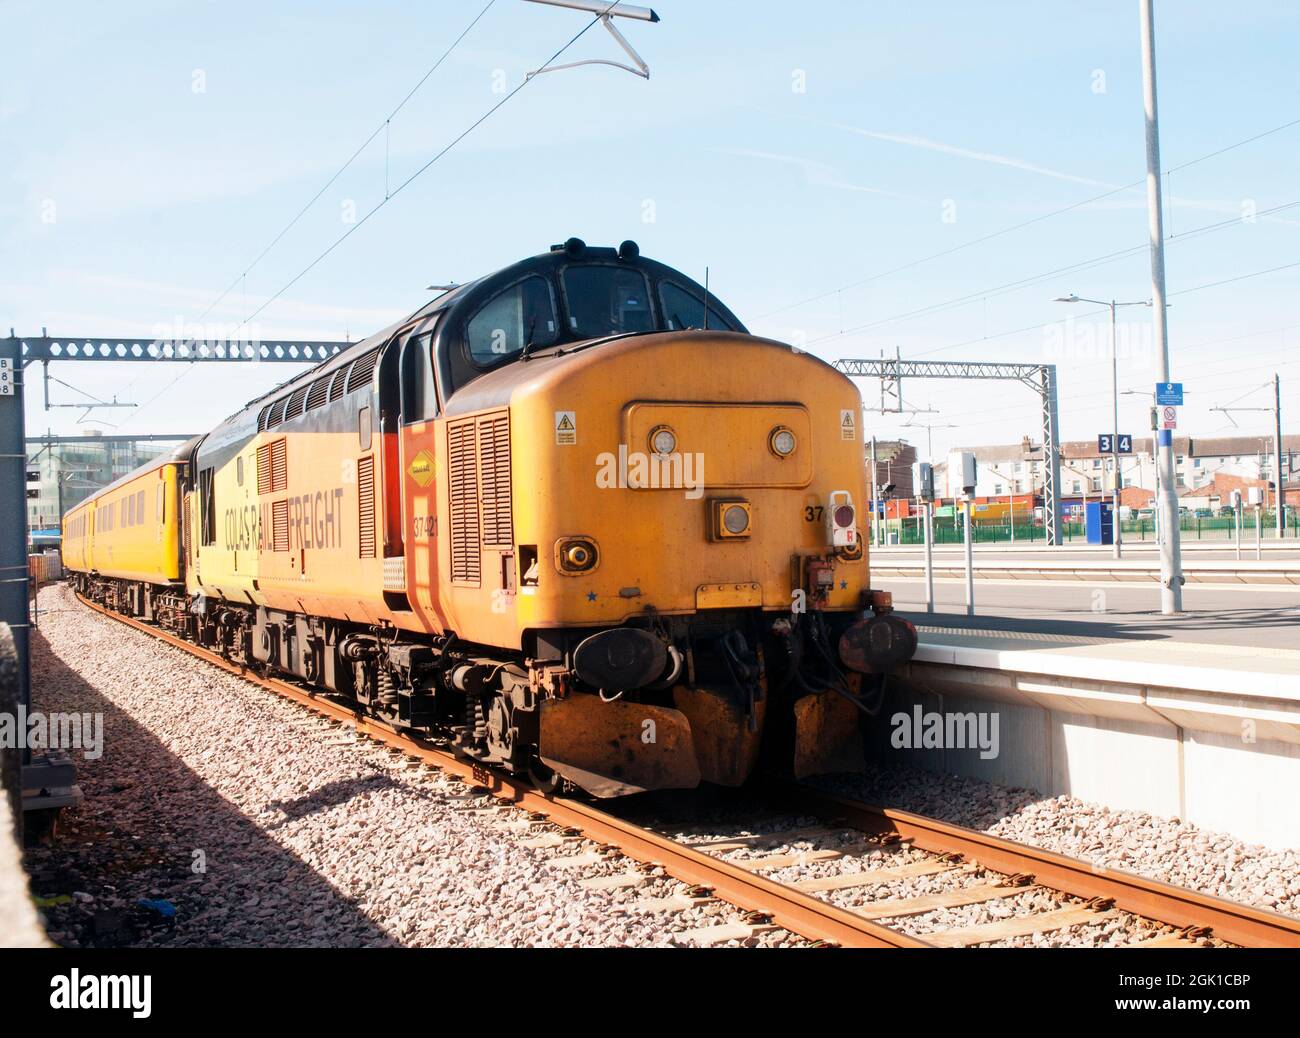 Colas Rail Freight English Electric Type 3 class 37 No 37421 Locomotive in siding at Blackpool North Station Lancashire England UK Stock Photo